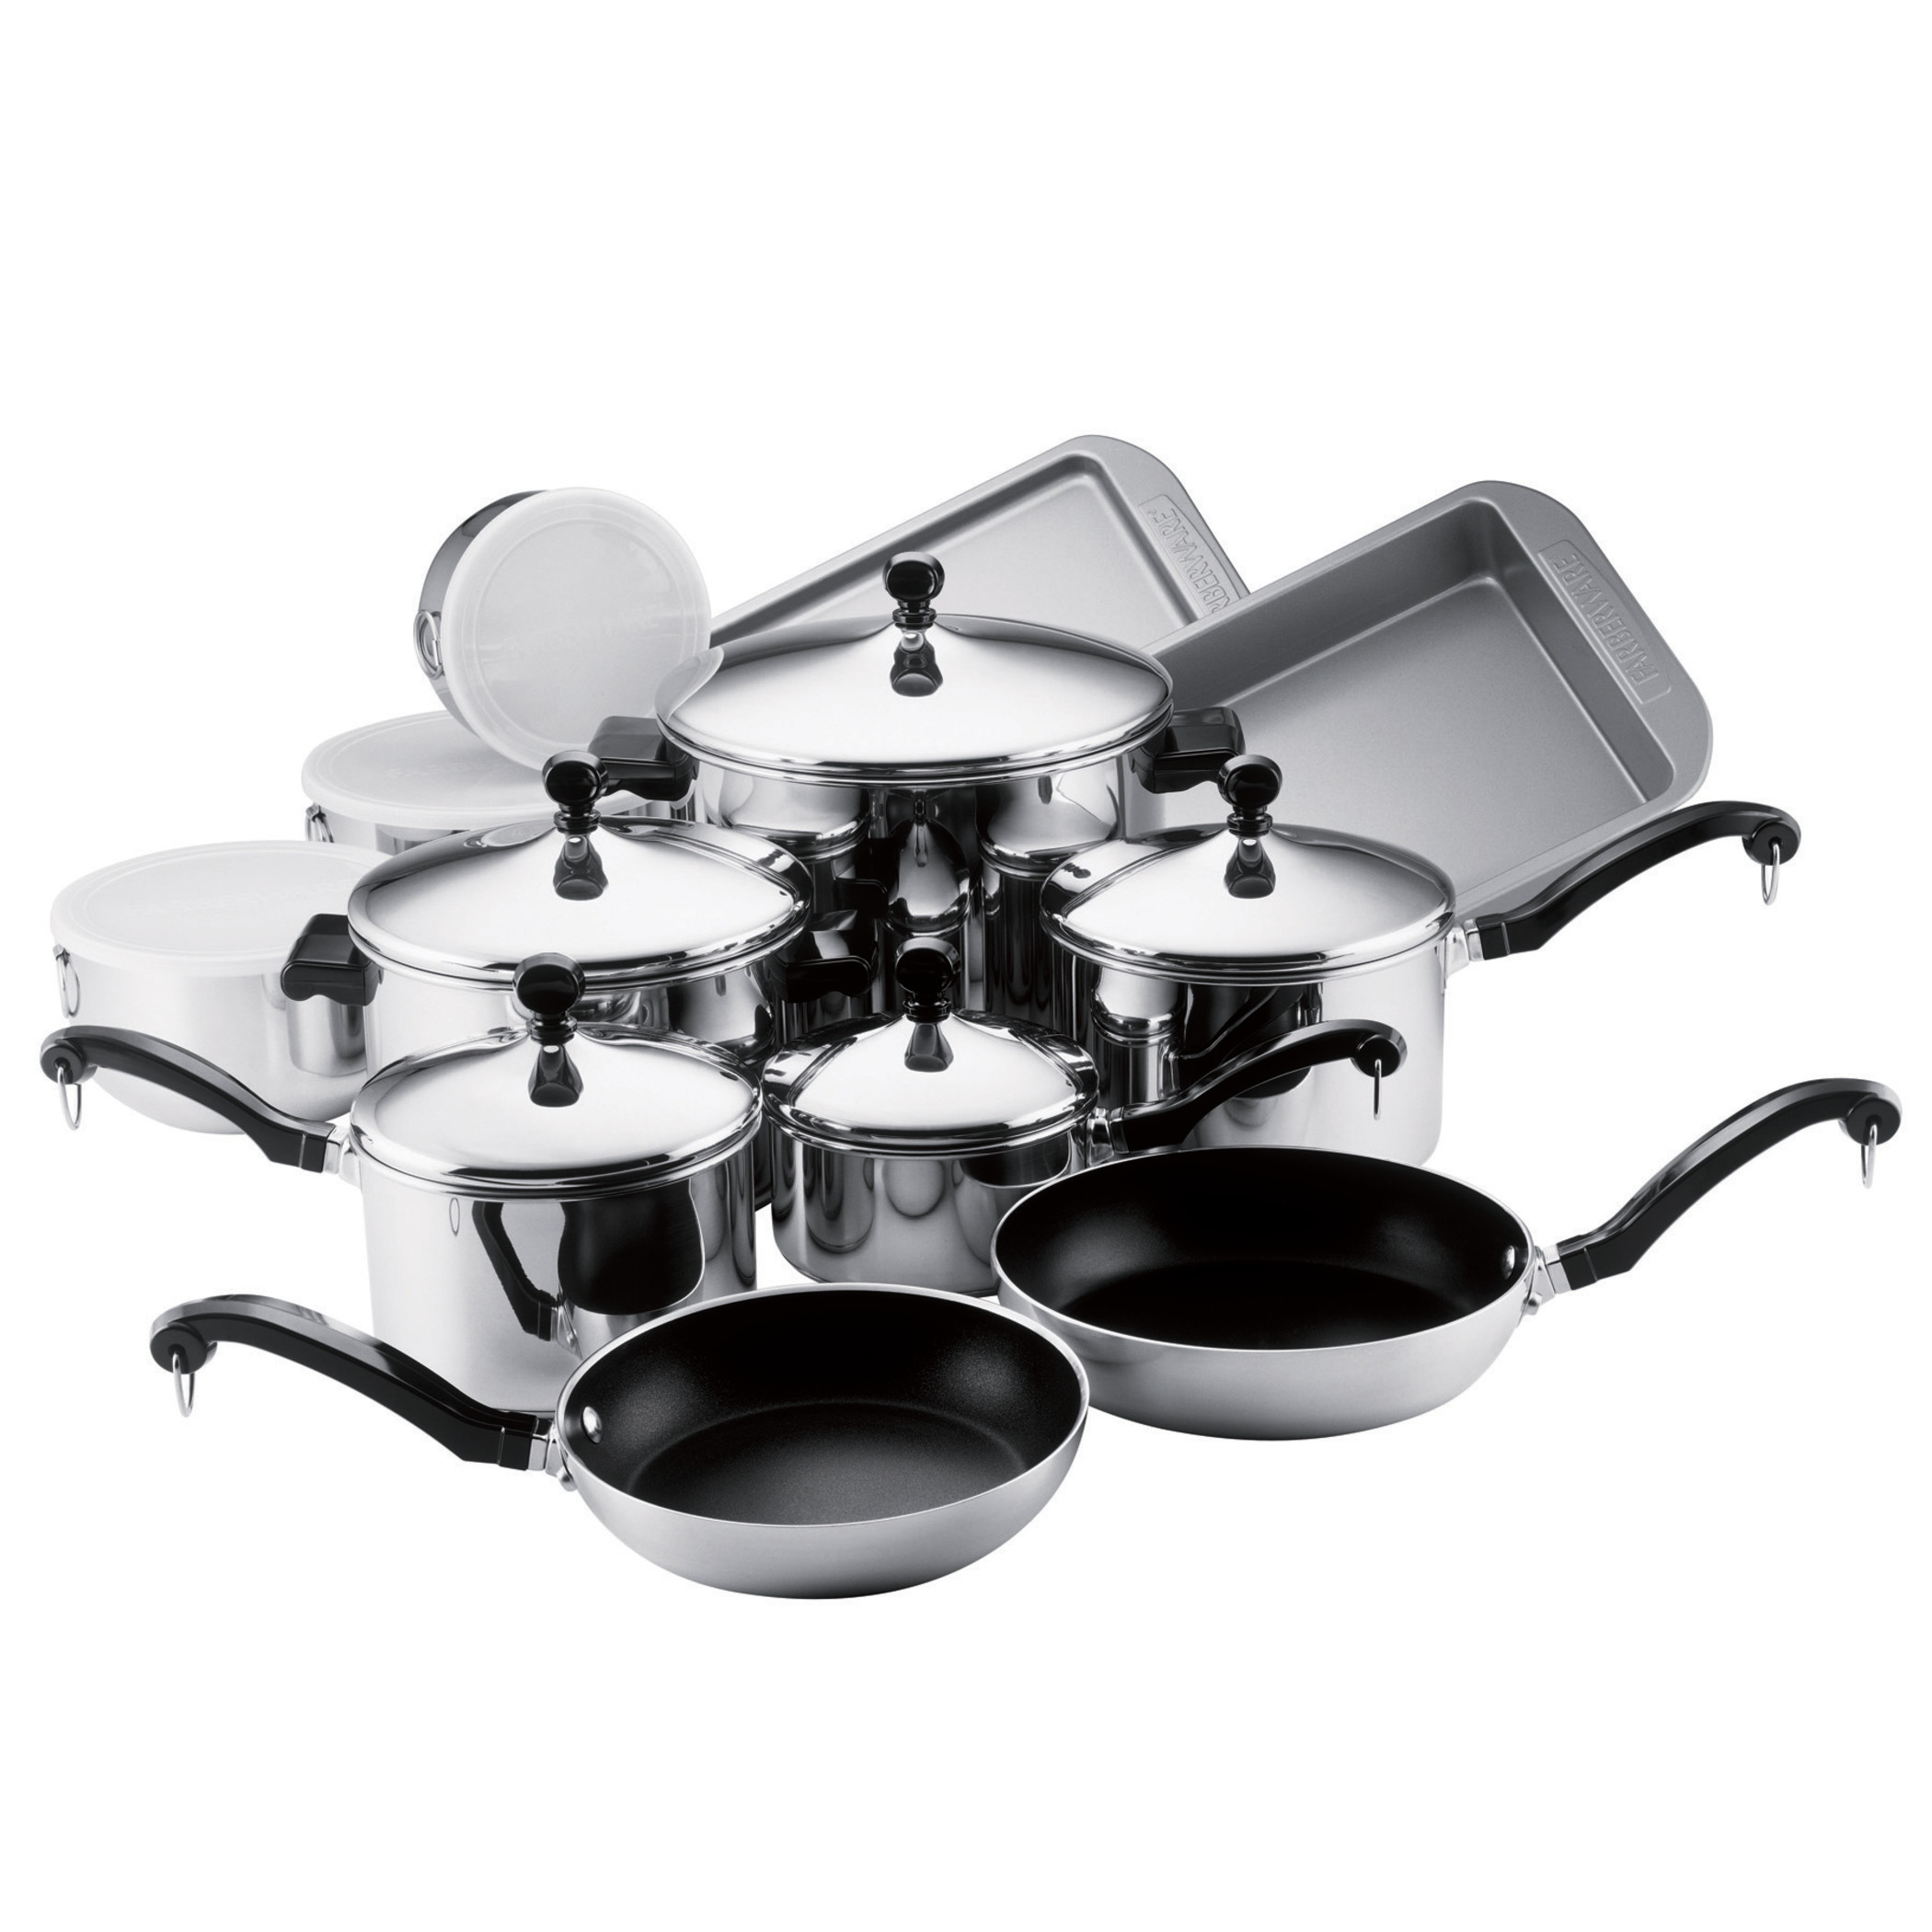 Farberware 17-Piece Classic Stainless Steel Pots and Pans Set/Cookware Set, Silver - image 1 of 12